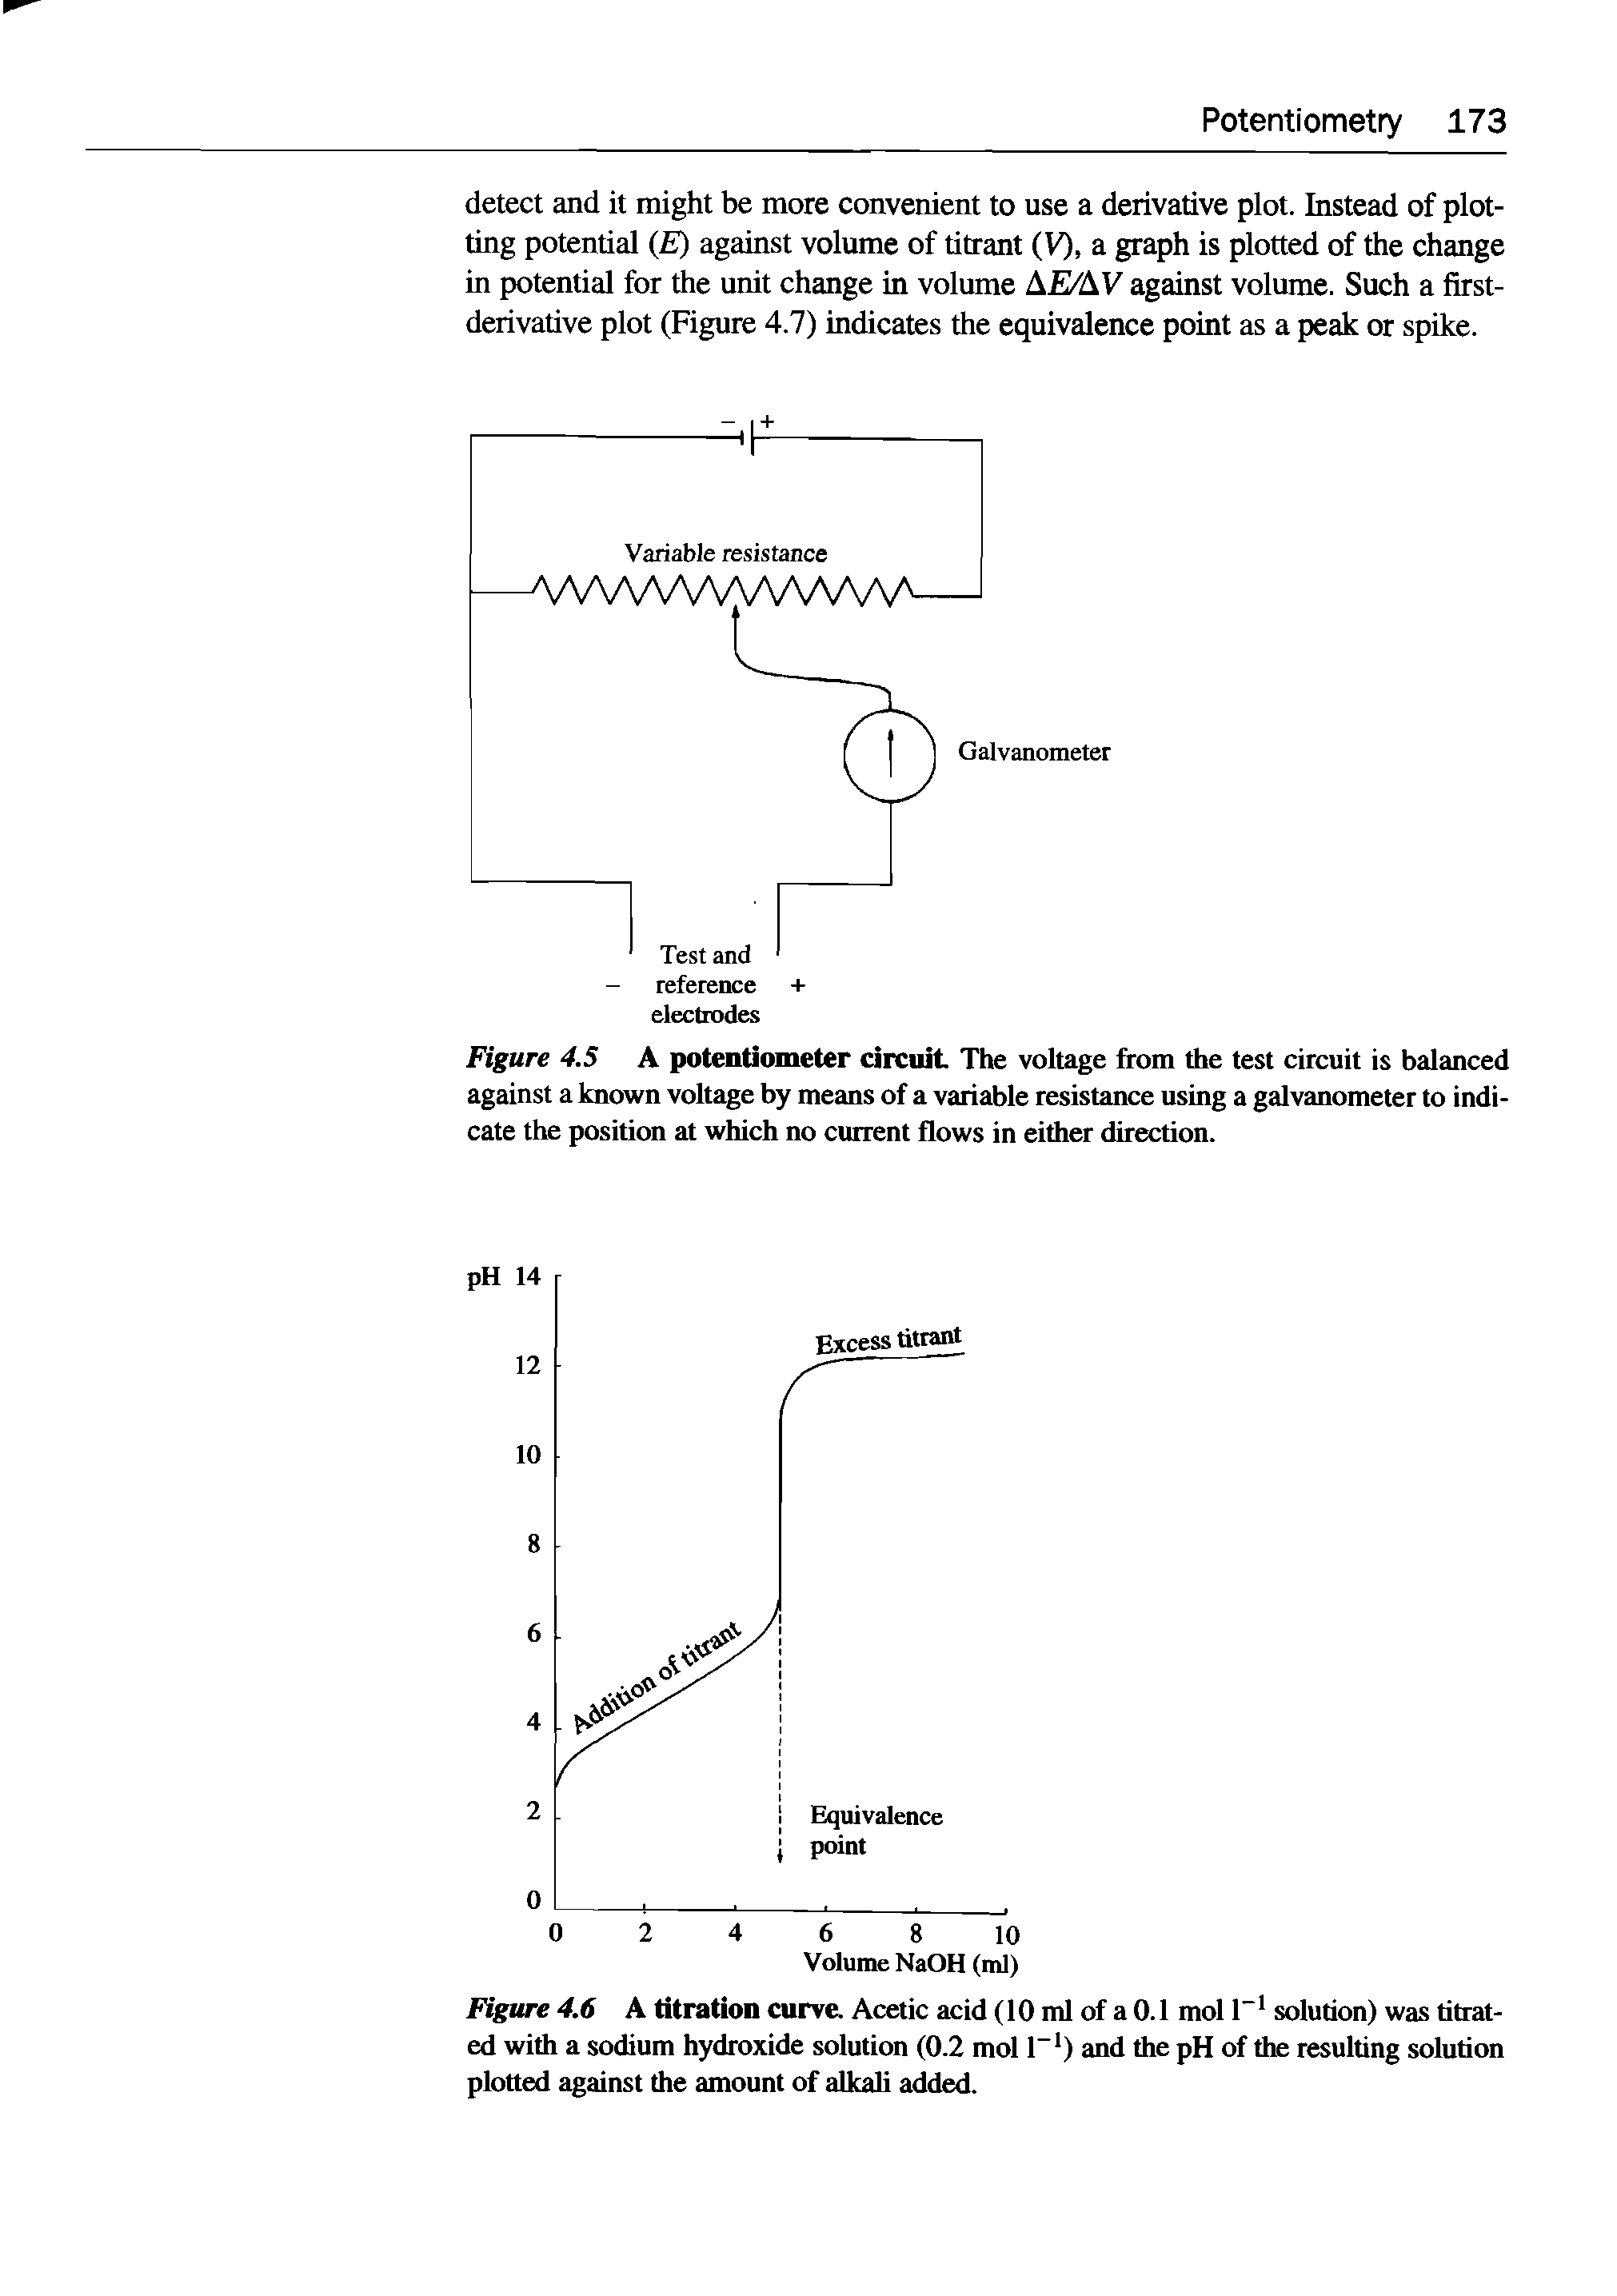 Figure 4.6 A titration curve. Acetic acid (10 ml of a 0.1 mol l-1 solution) was titrated with a sodium hydroxide solution (0.2 mol l-1) and the pH of the resulting solution plotted against the amount of alkali added.